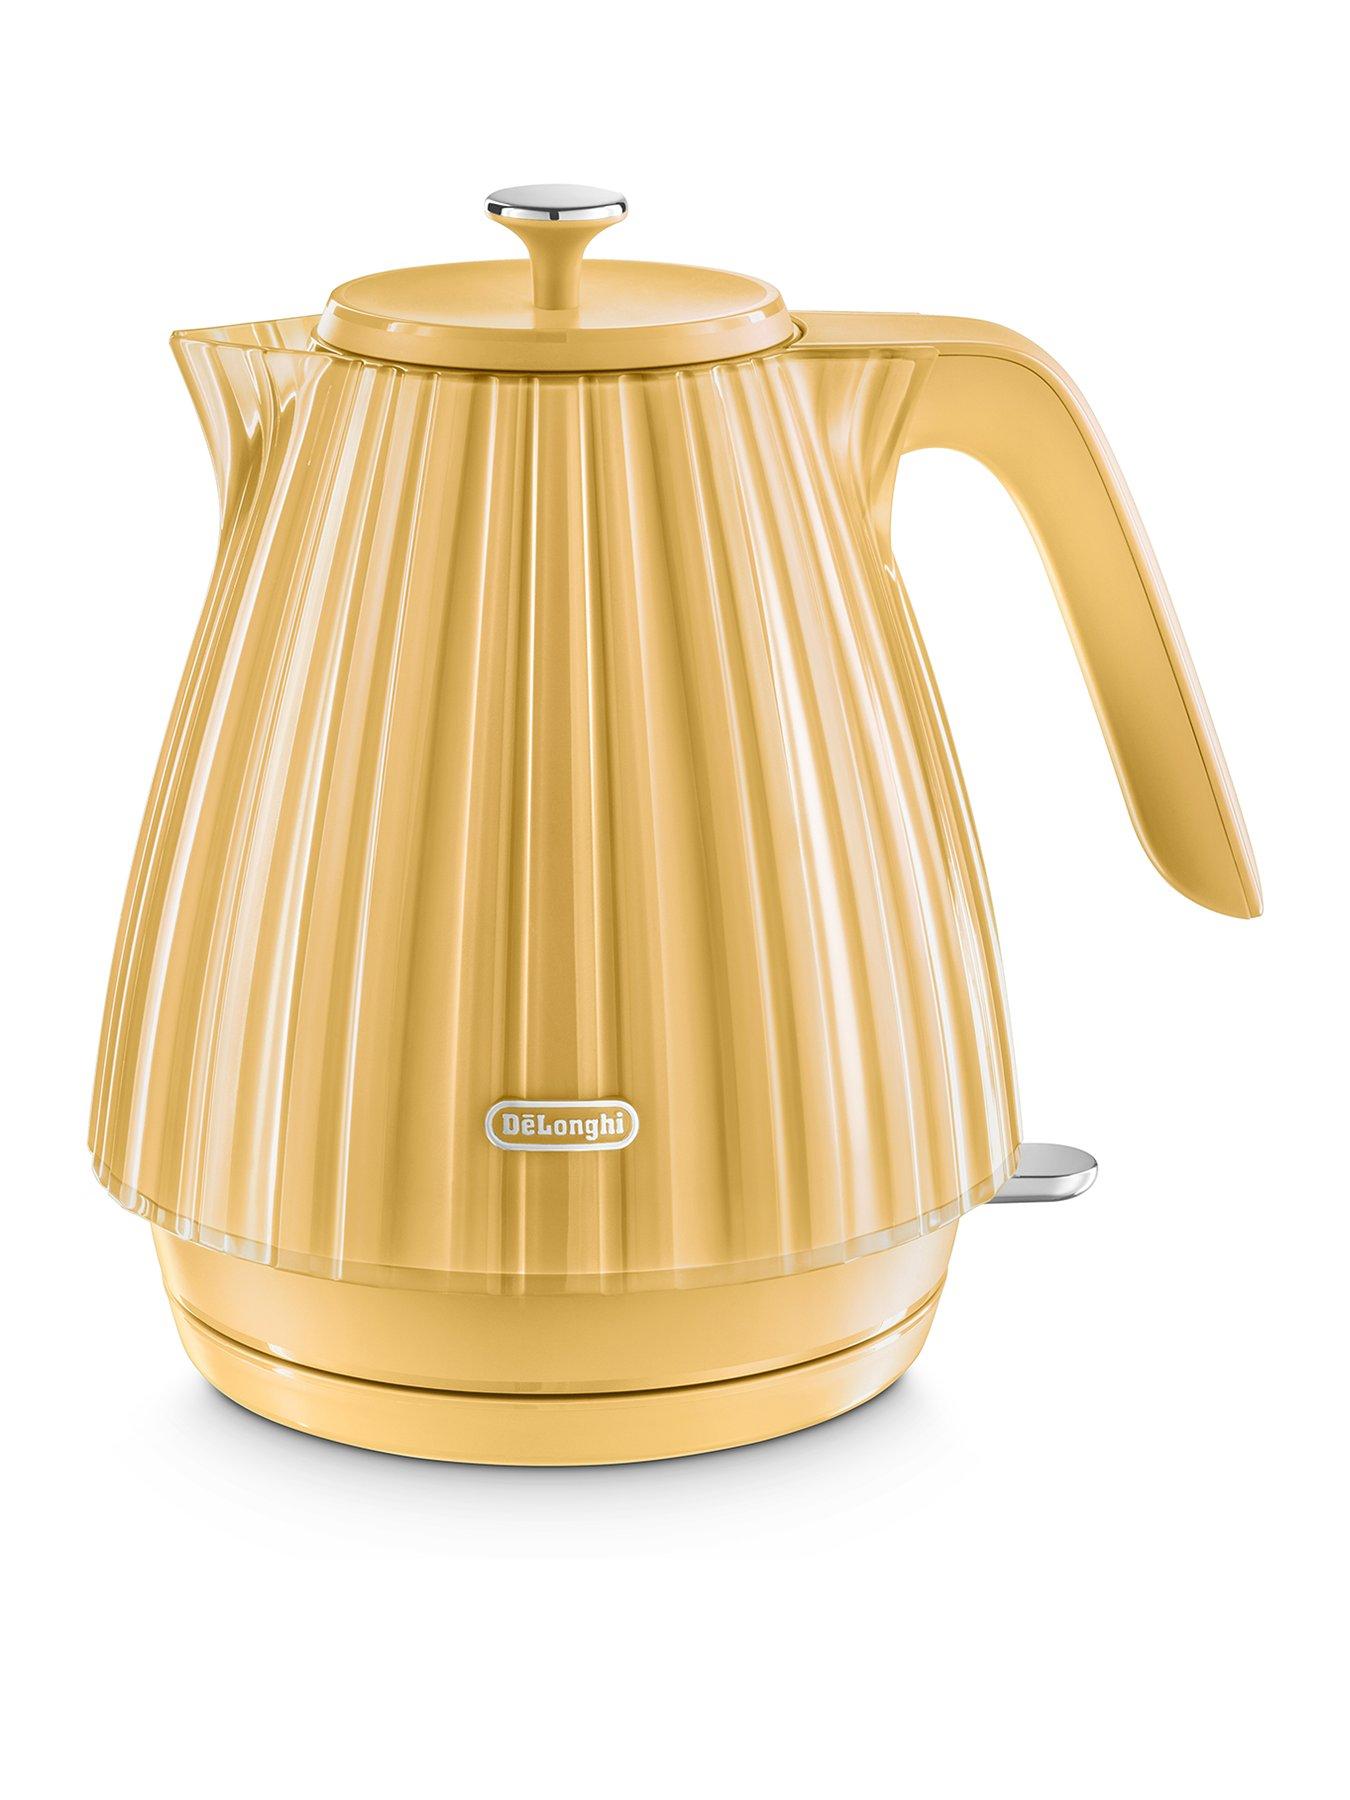 George Home Yellow Fast Boil Kettle 1.7L - ASDA Groceries